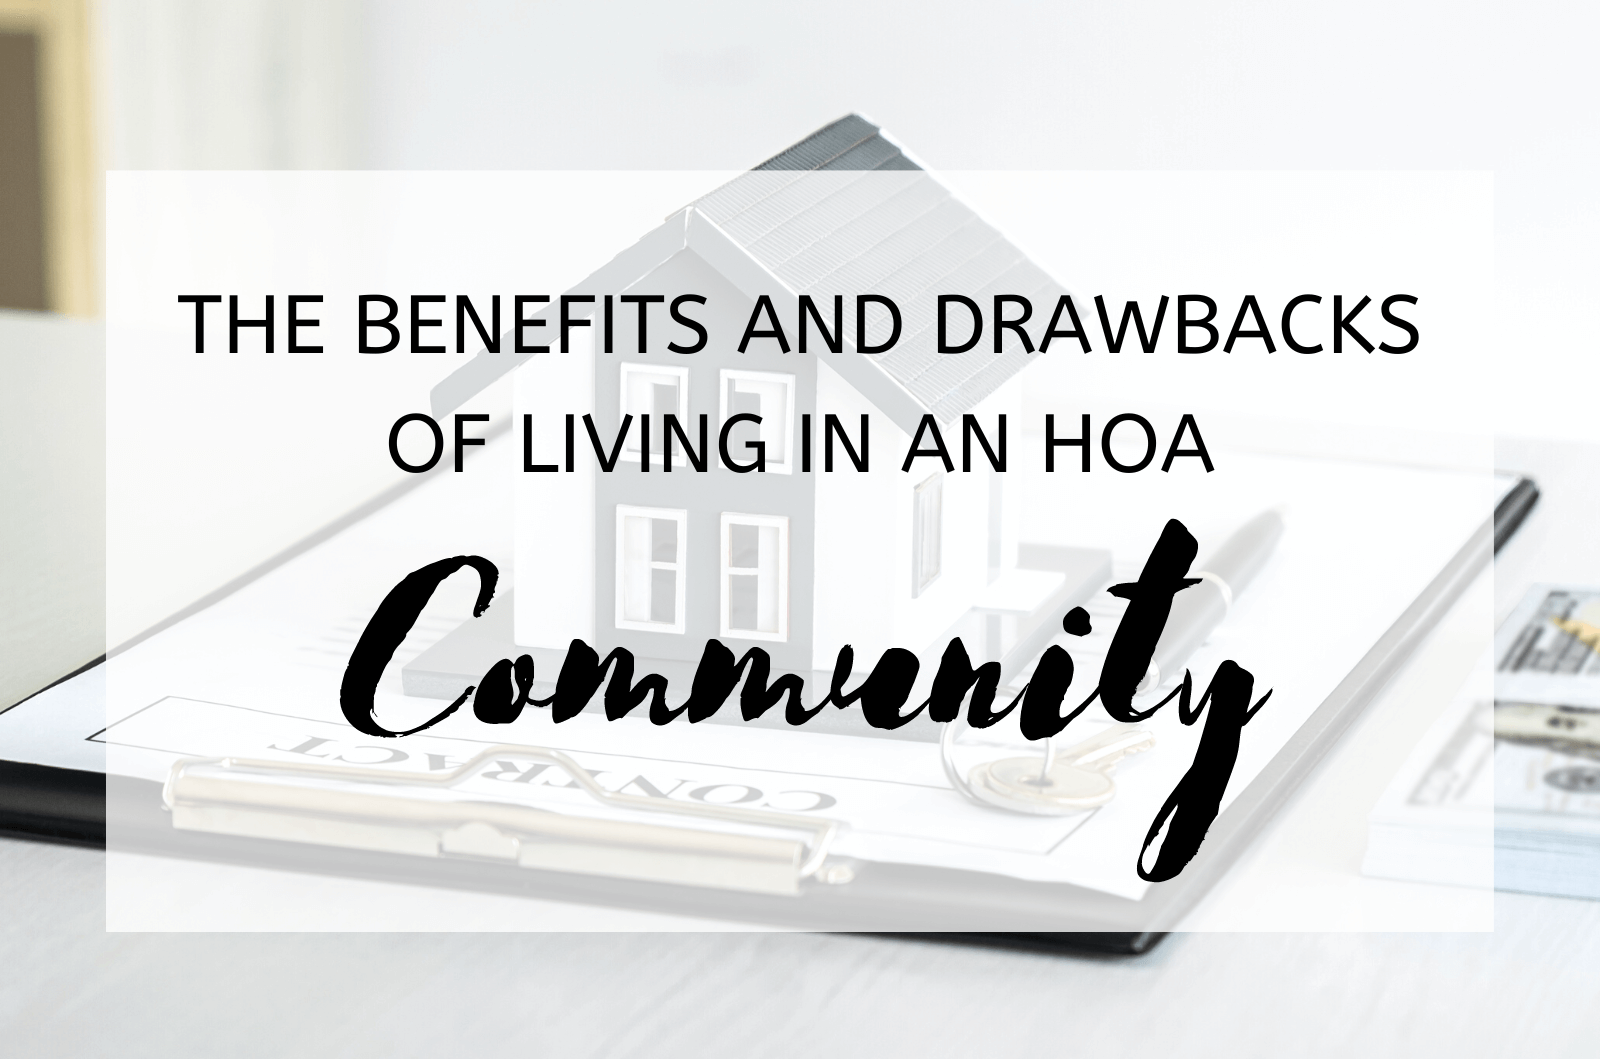 The Benefits And Drawbacks Of Living In An Hoa Community (1)